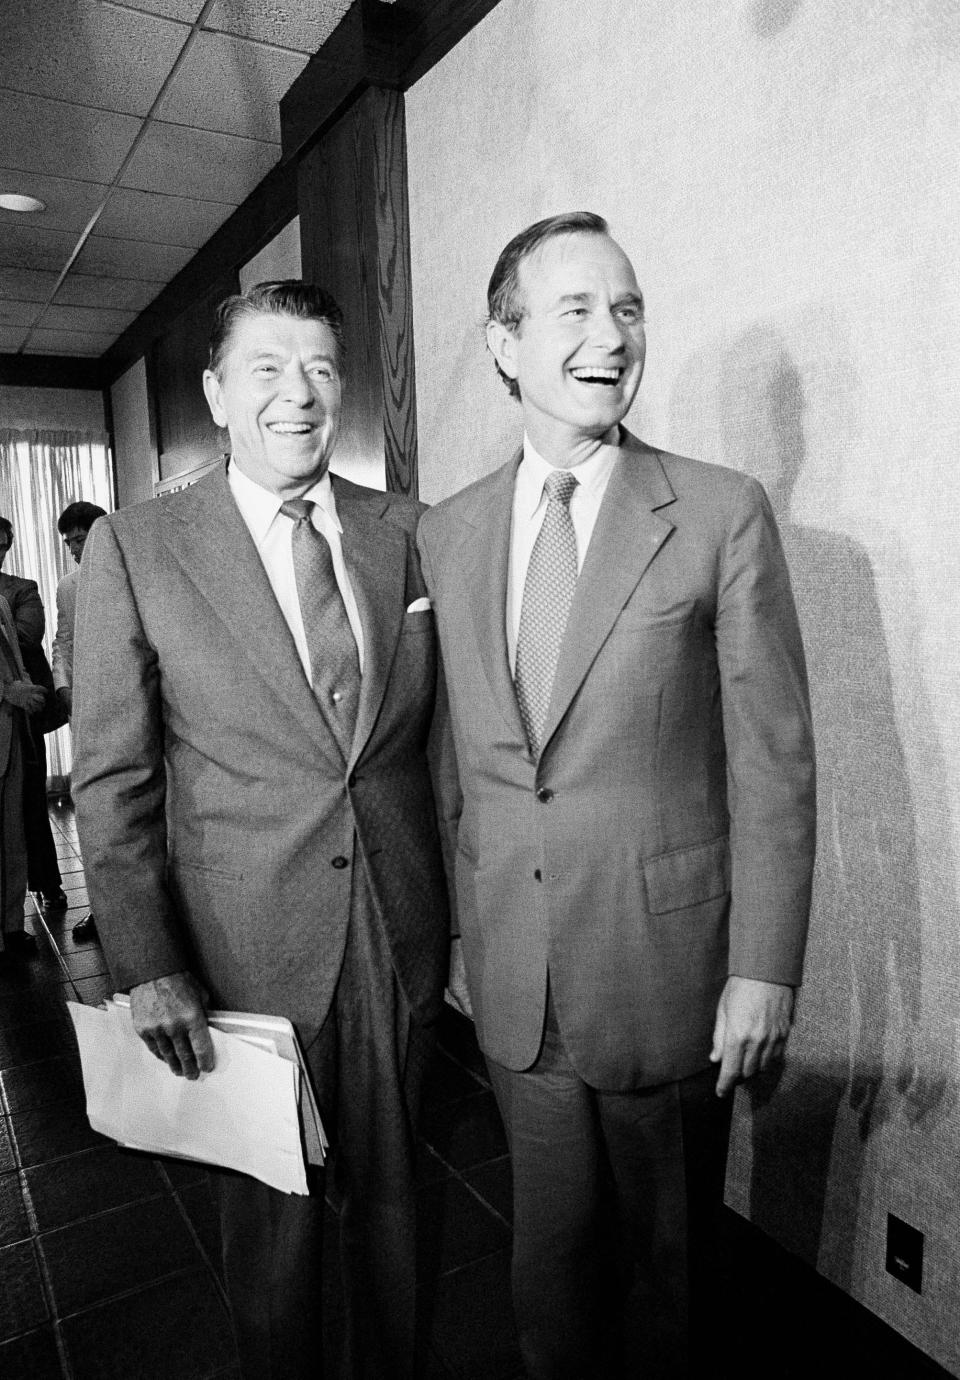 Ronald Reagan, with vice presidential candidate George H.W. Bush, in 1980